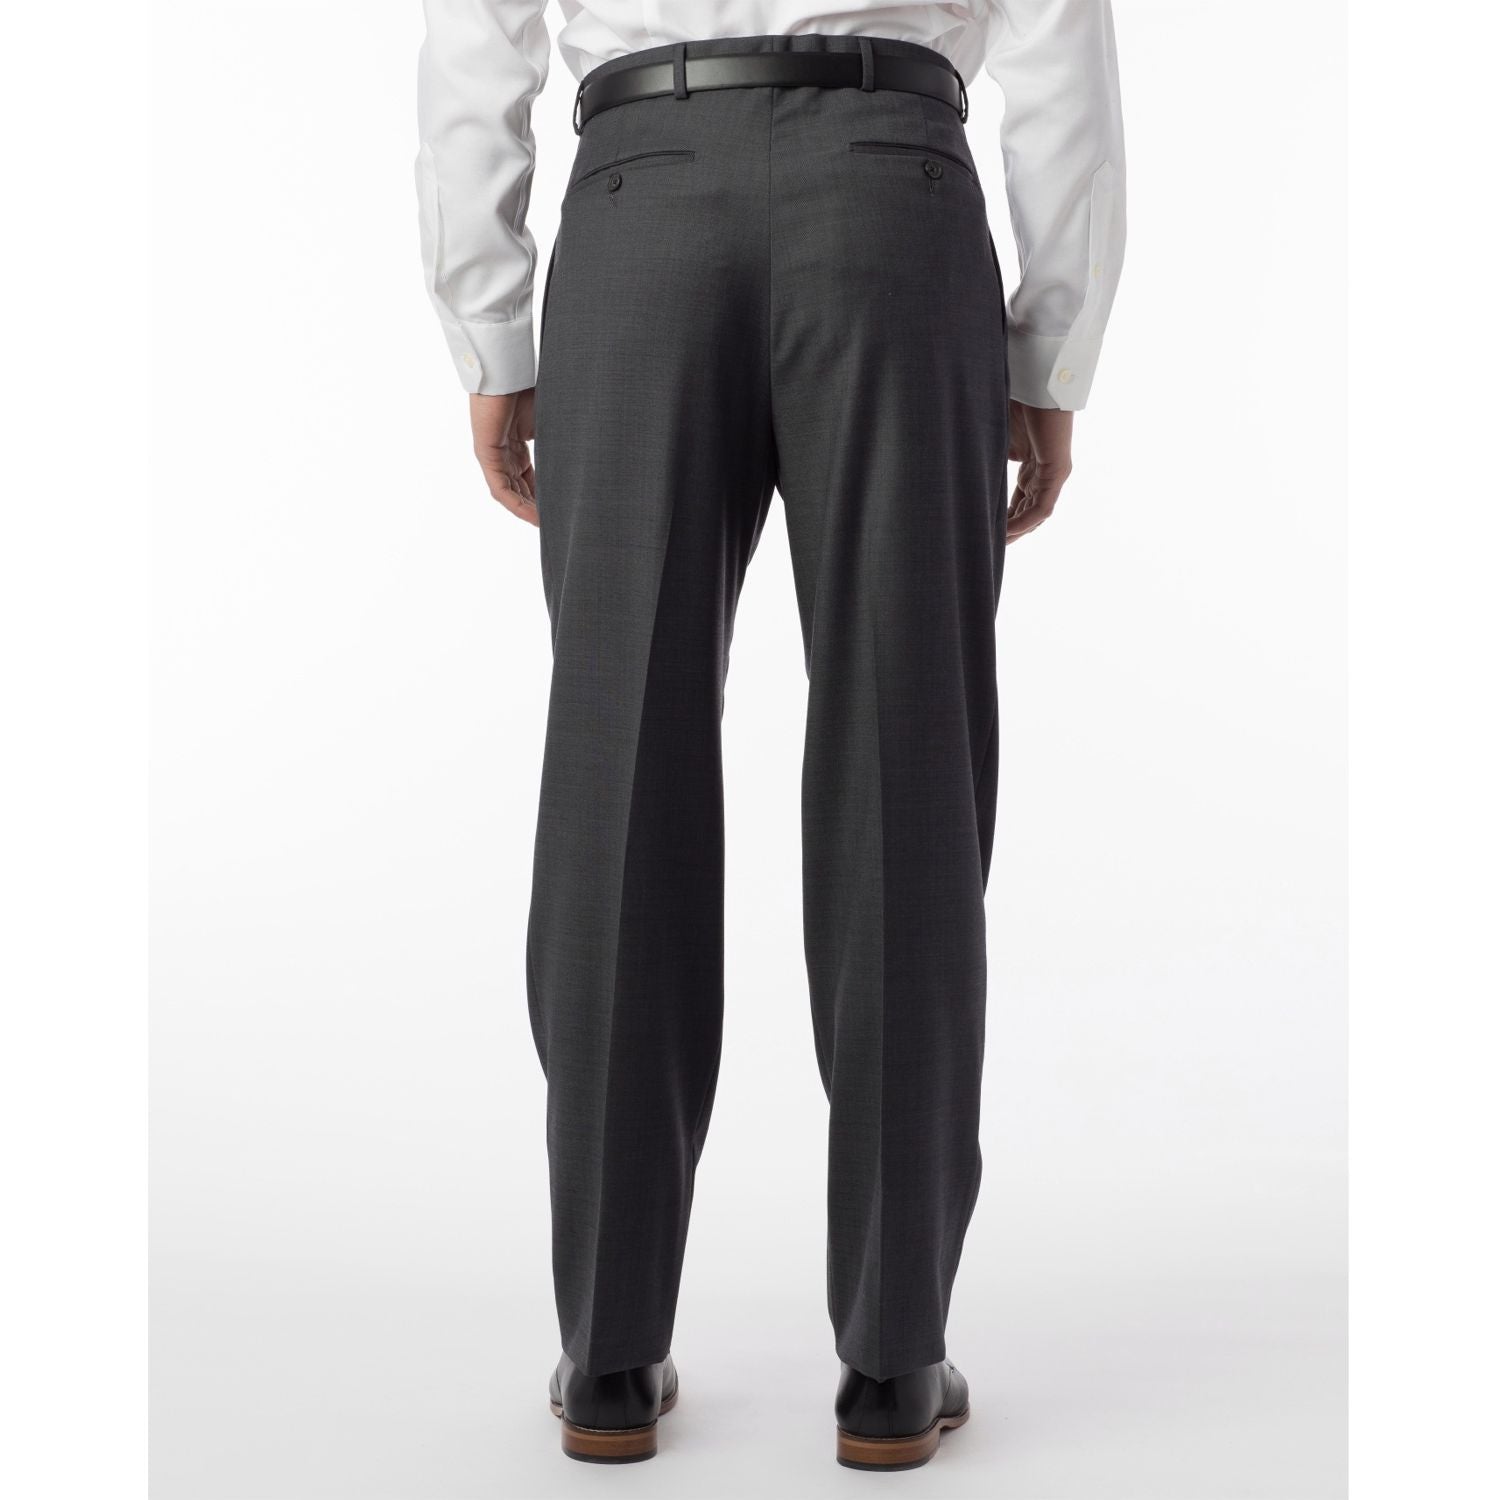 Super 120s Wool Travel Twill Comfort-EZE Trouser in Charcoal Grey (Manchester Pleated Model) by Ballin